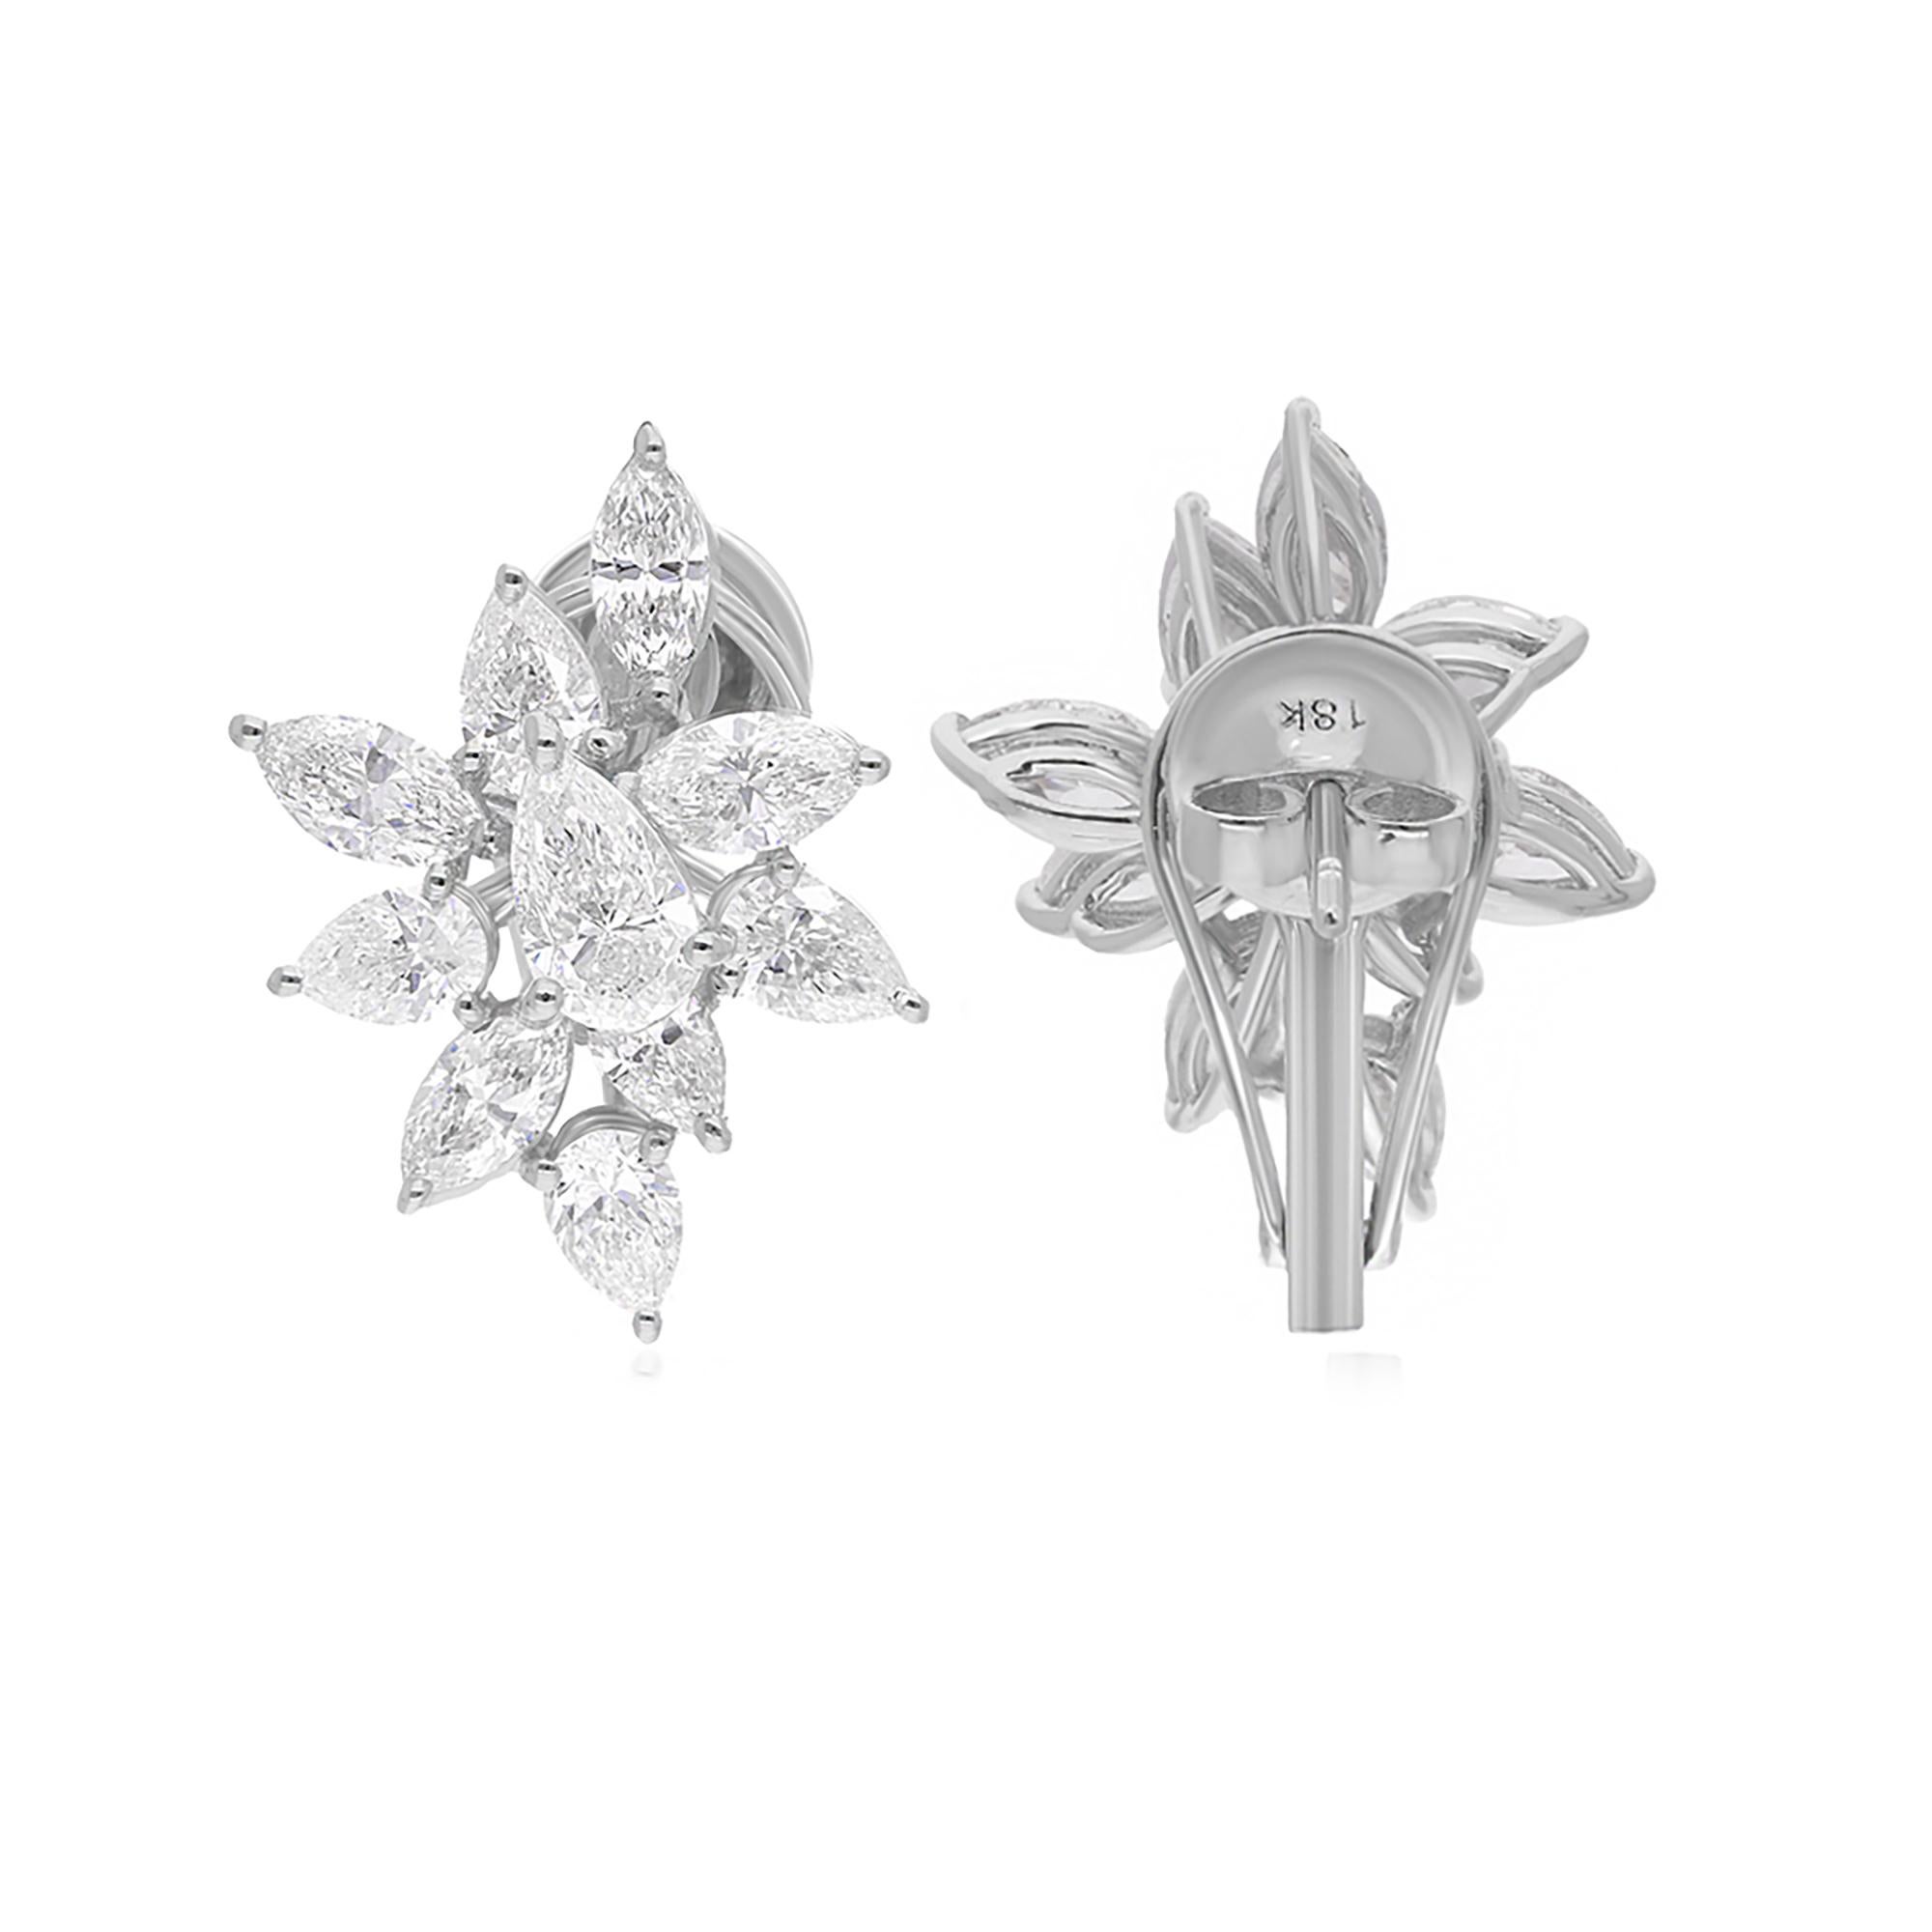 Step into the world of luxury and sophistication with these stunning 4.07 Carat Pear & Marquise Diamond Stud Earrings, crafted in exquisite 18 Karat White Gold. Meticulously designed to dazzle and delight, these earrings are a testament to the